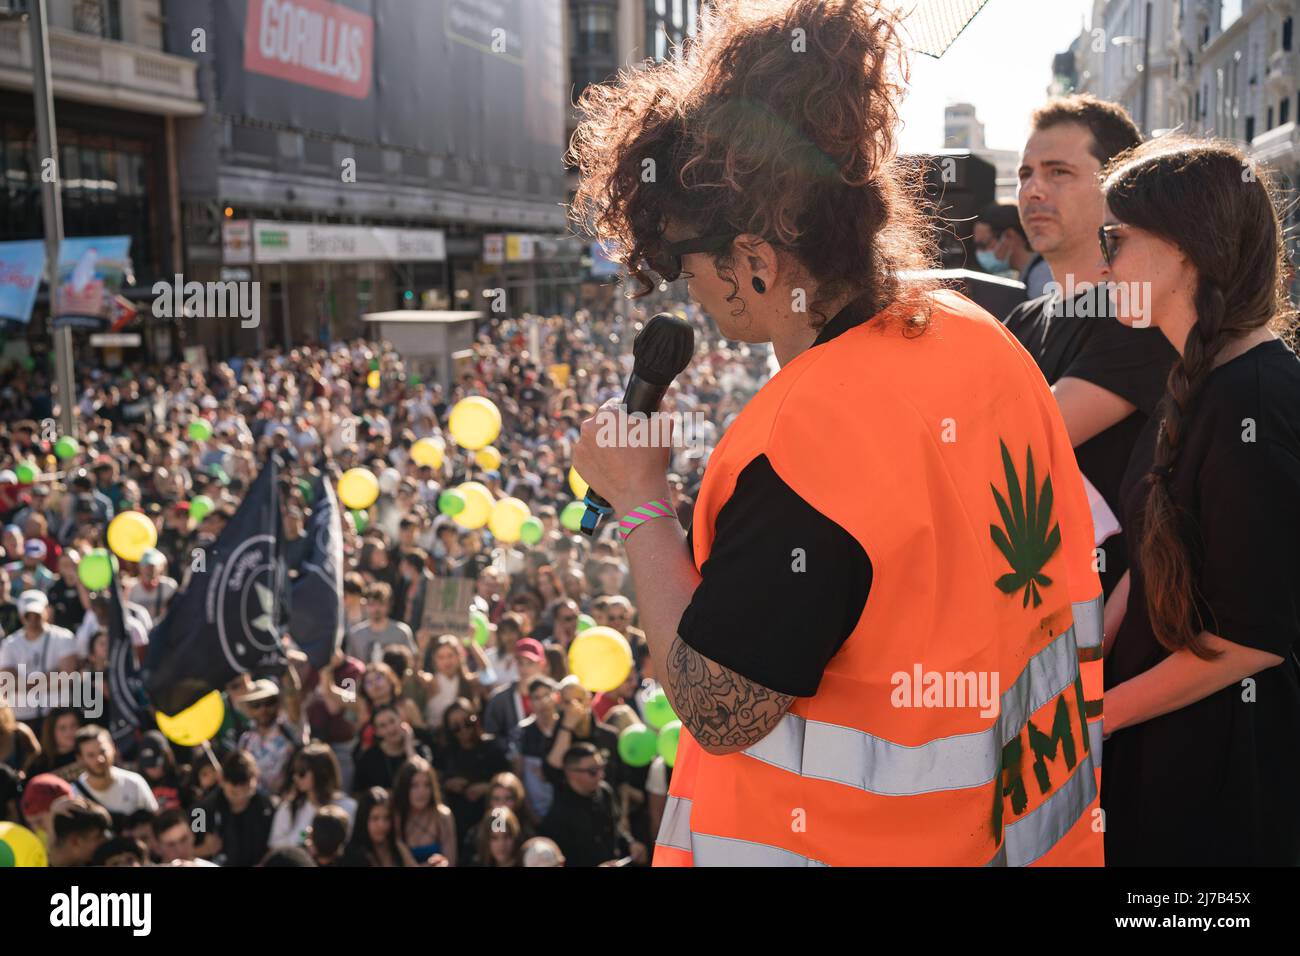 Organizers of a pro-cannabis demonstration seen during the rally. Thousands of pro-cannabis activists took part in a demonstration in La Gran Via in Madrid, Spain, in favor of legalizing the medicinal and recreational use of marijuana. (Photo by Diego Radames / SOPA Images/Sipa USA) Stock Photo